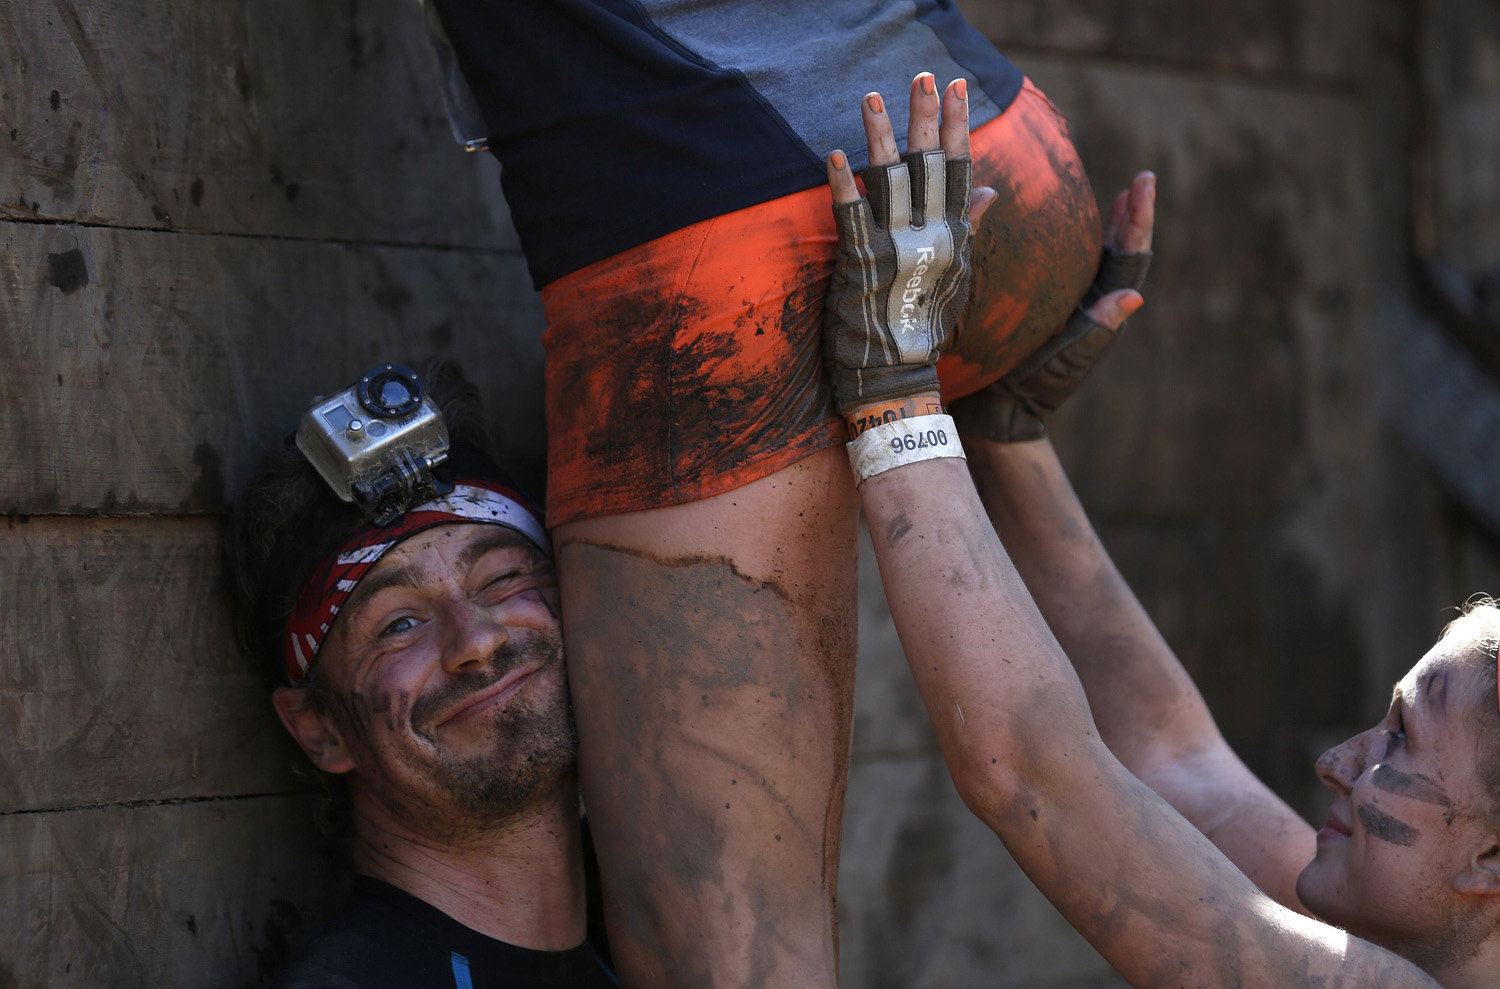 Participants climb over a wall at the "Tough Mudder" endurance event series in Arnsberg, Germany on Sept. 6, 2014.